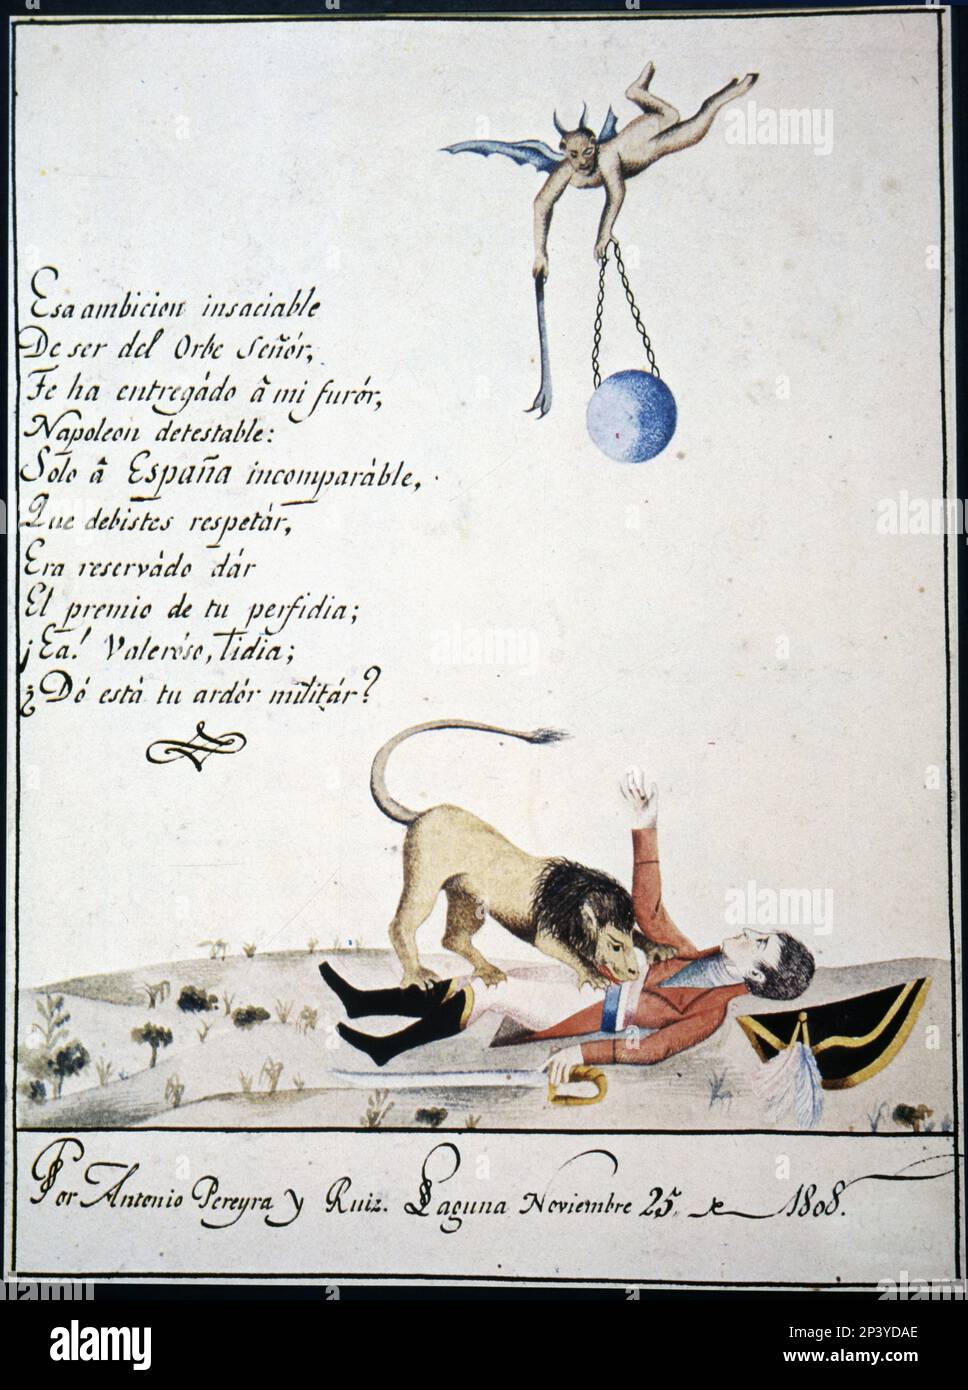 Patriotic drawing with allegories against Napoleon. Made in 1808 in the Canary Islands. Stock Photo